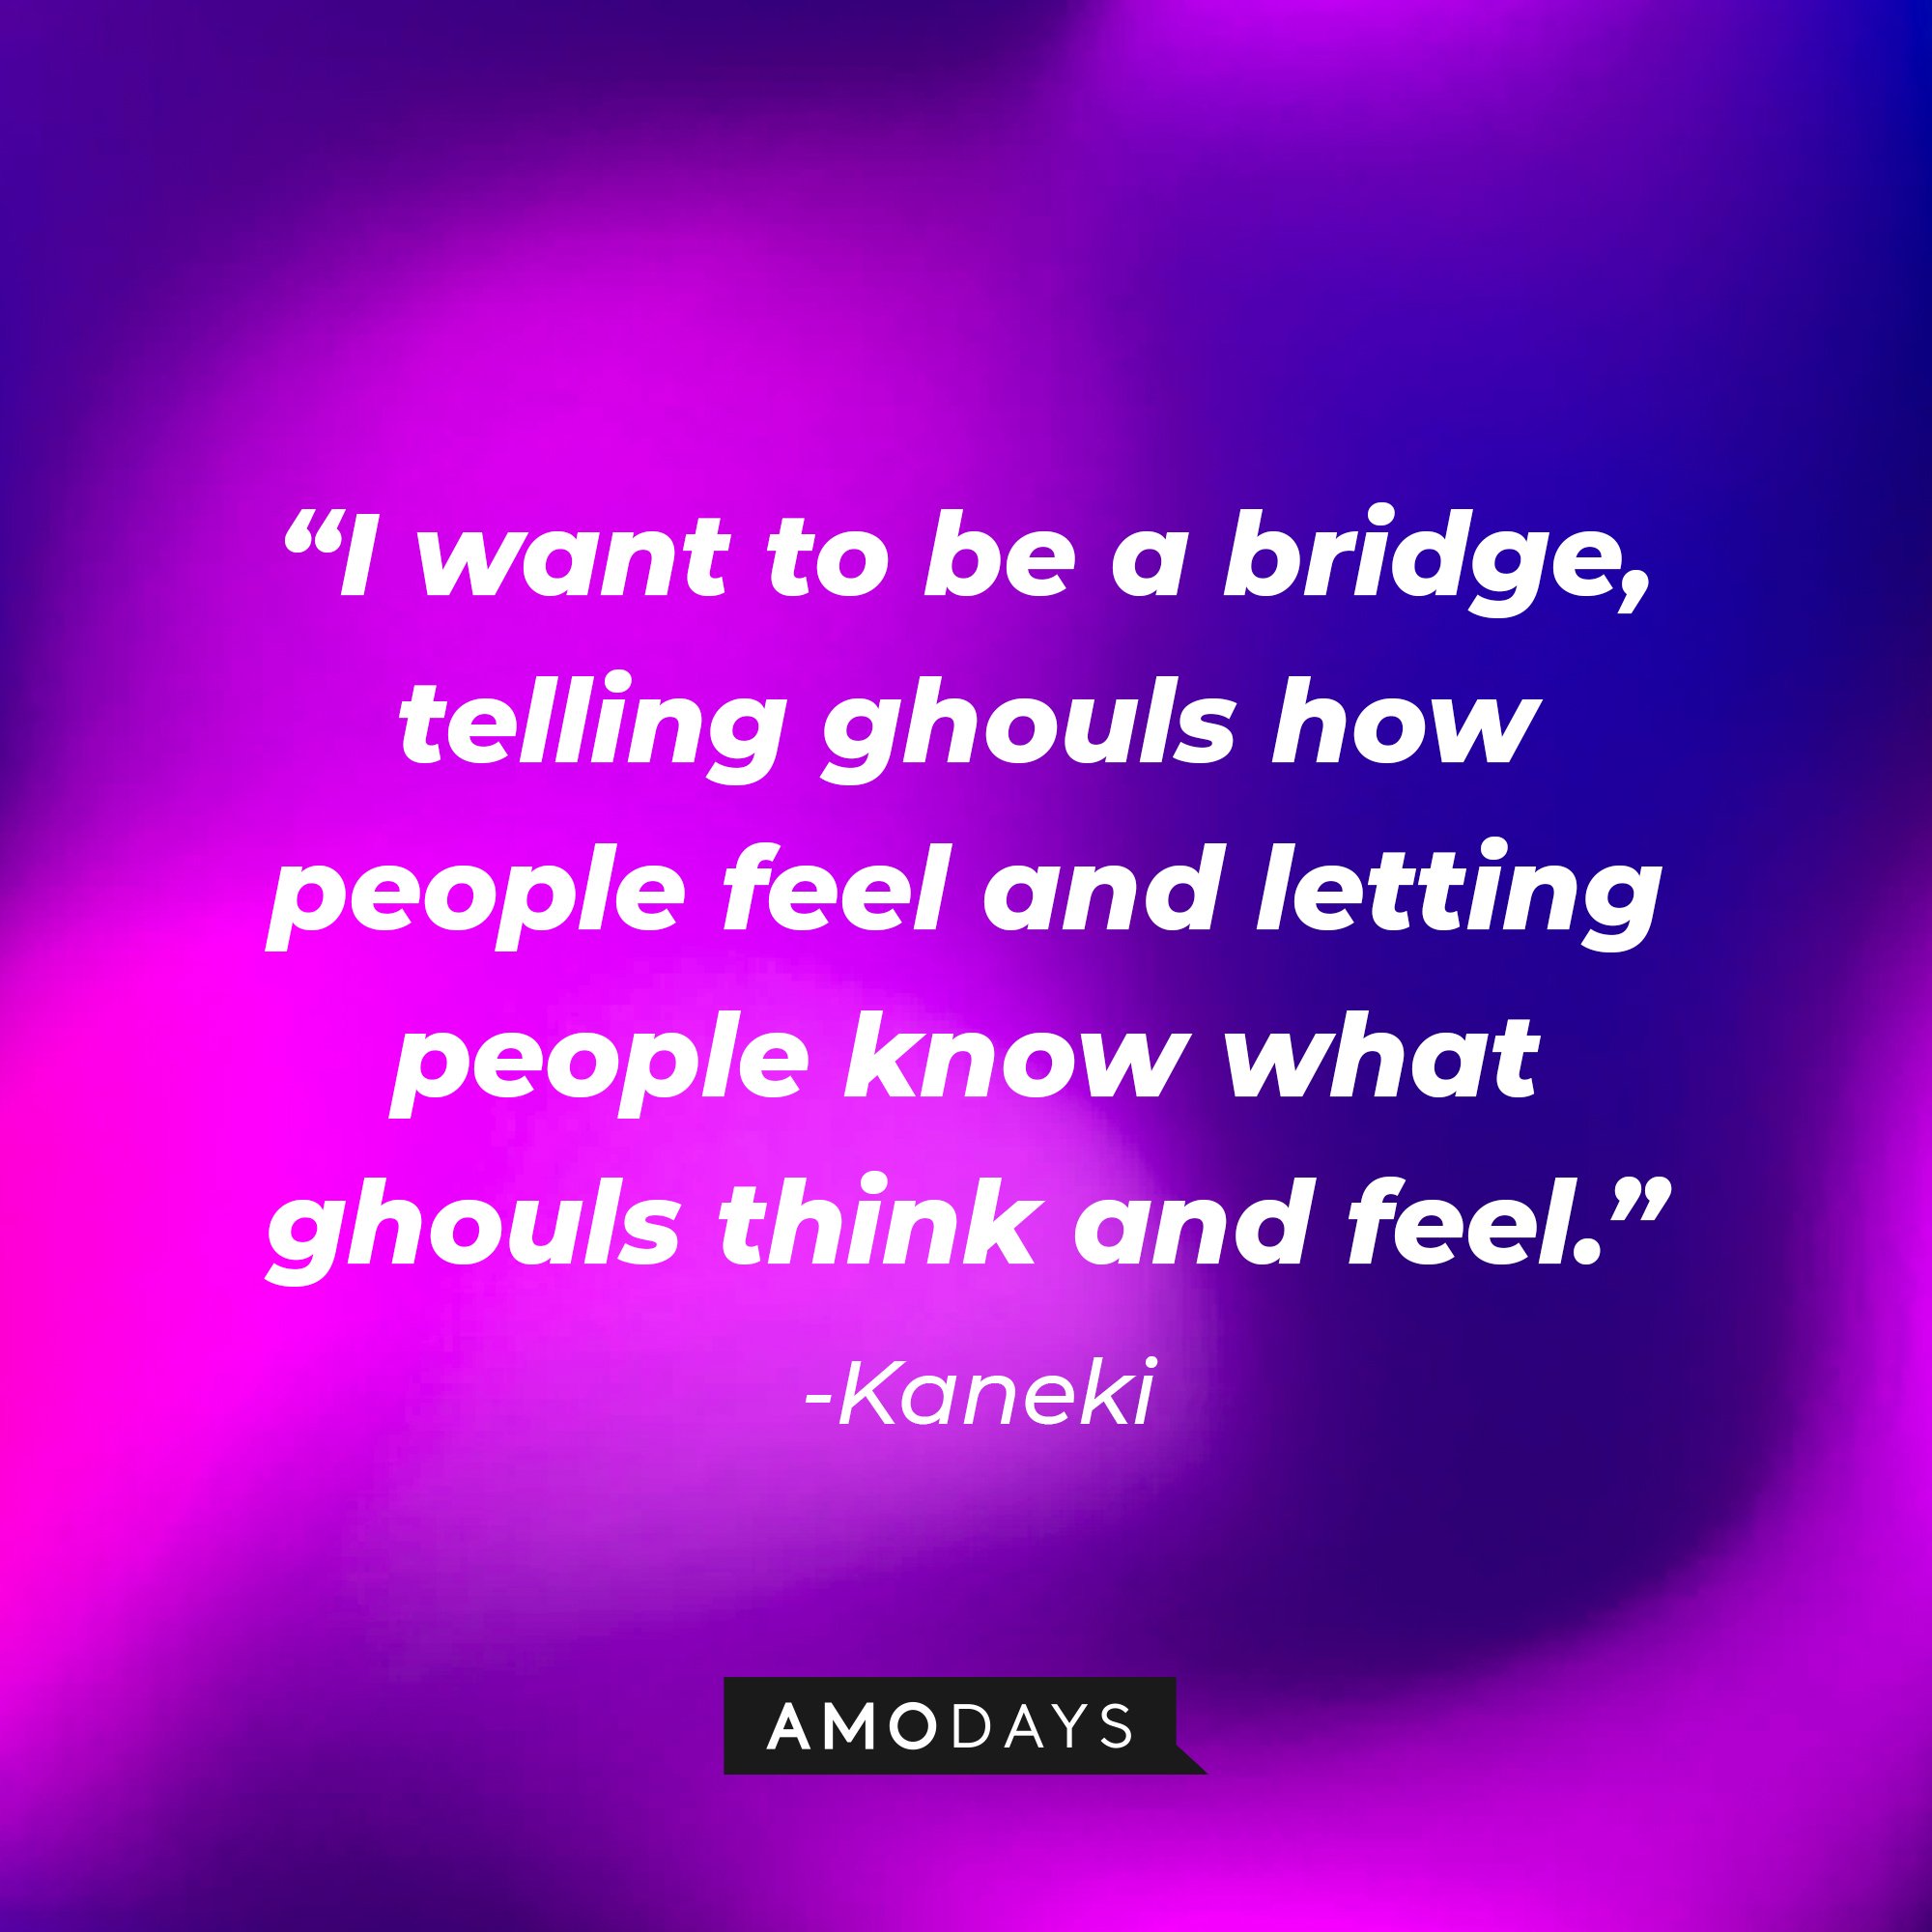 Kaneki's quote: “I want to be a bridge, telling ghouls how people feel and letting people know what ghouls think and feel.” | Image: AmoDays